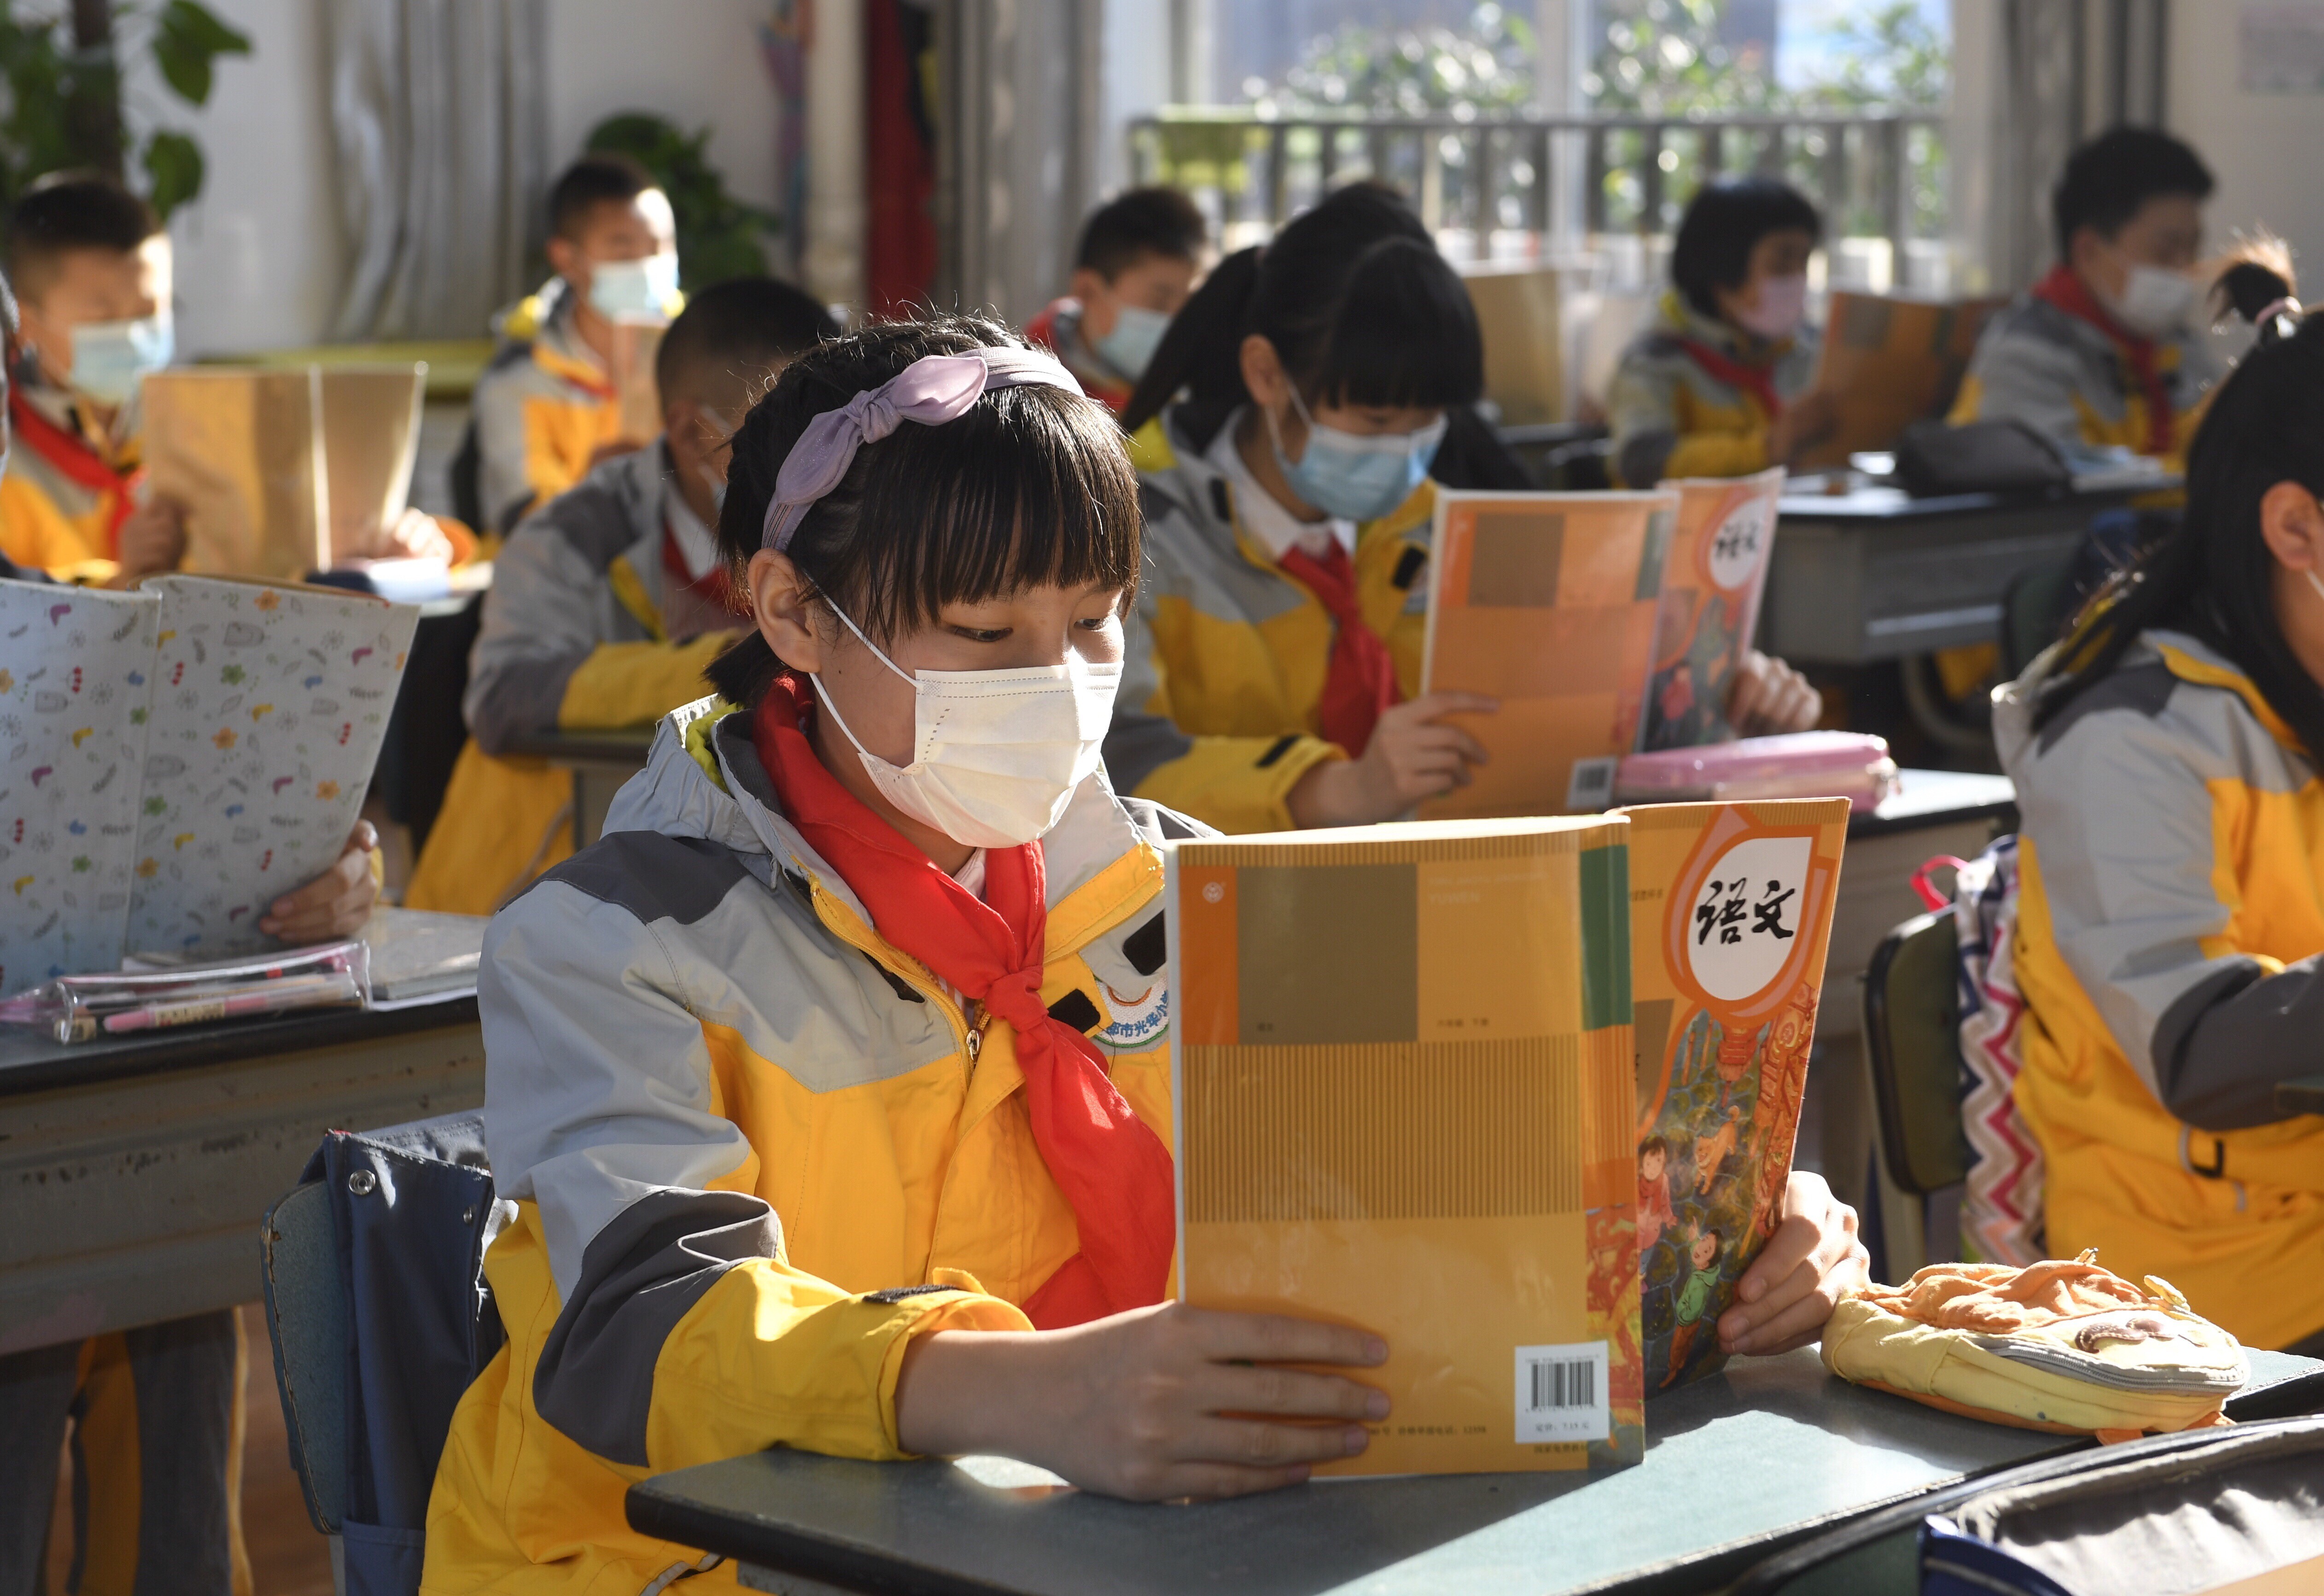 Students reading at the primary school attached to the Southwestern University of Finance and Economics in Chengdu’s Qingyang district, in China’s Sichuan province, on April 27, 2020. Photo: Xinhua